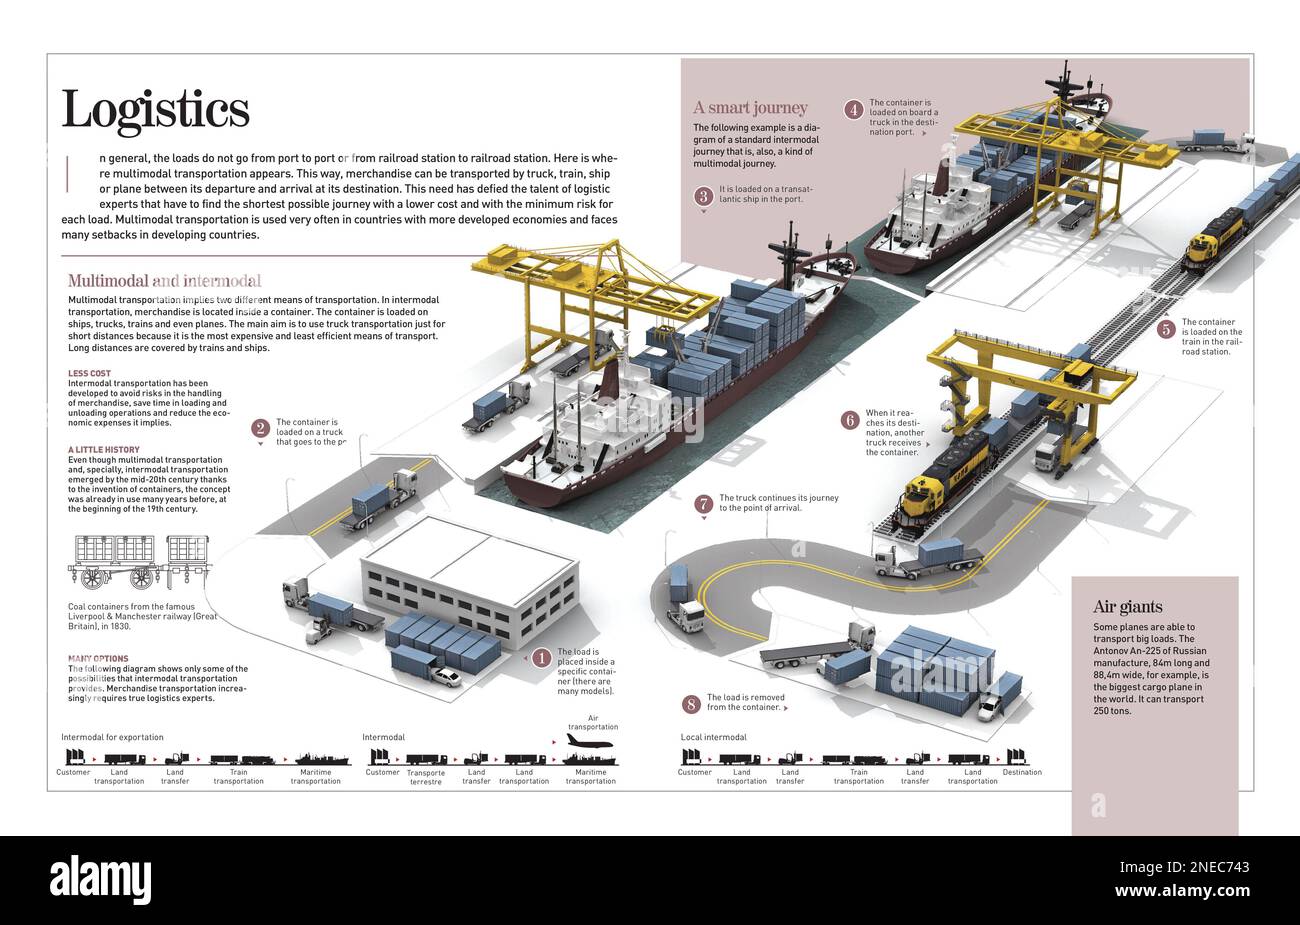 Infographic about modern multimodal and intermodal merchandise transportation logistics. [Adobe InDesign (.indd); 4960x8503]. Stock Photo